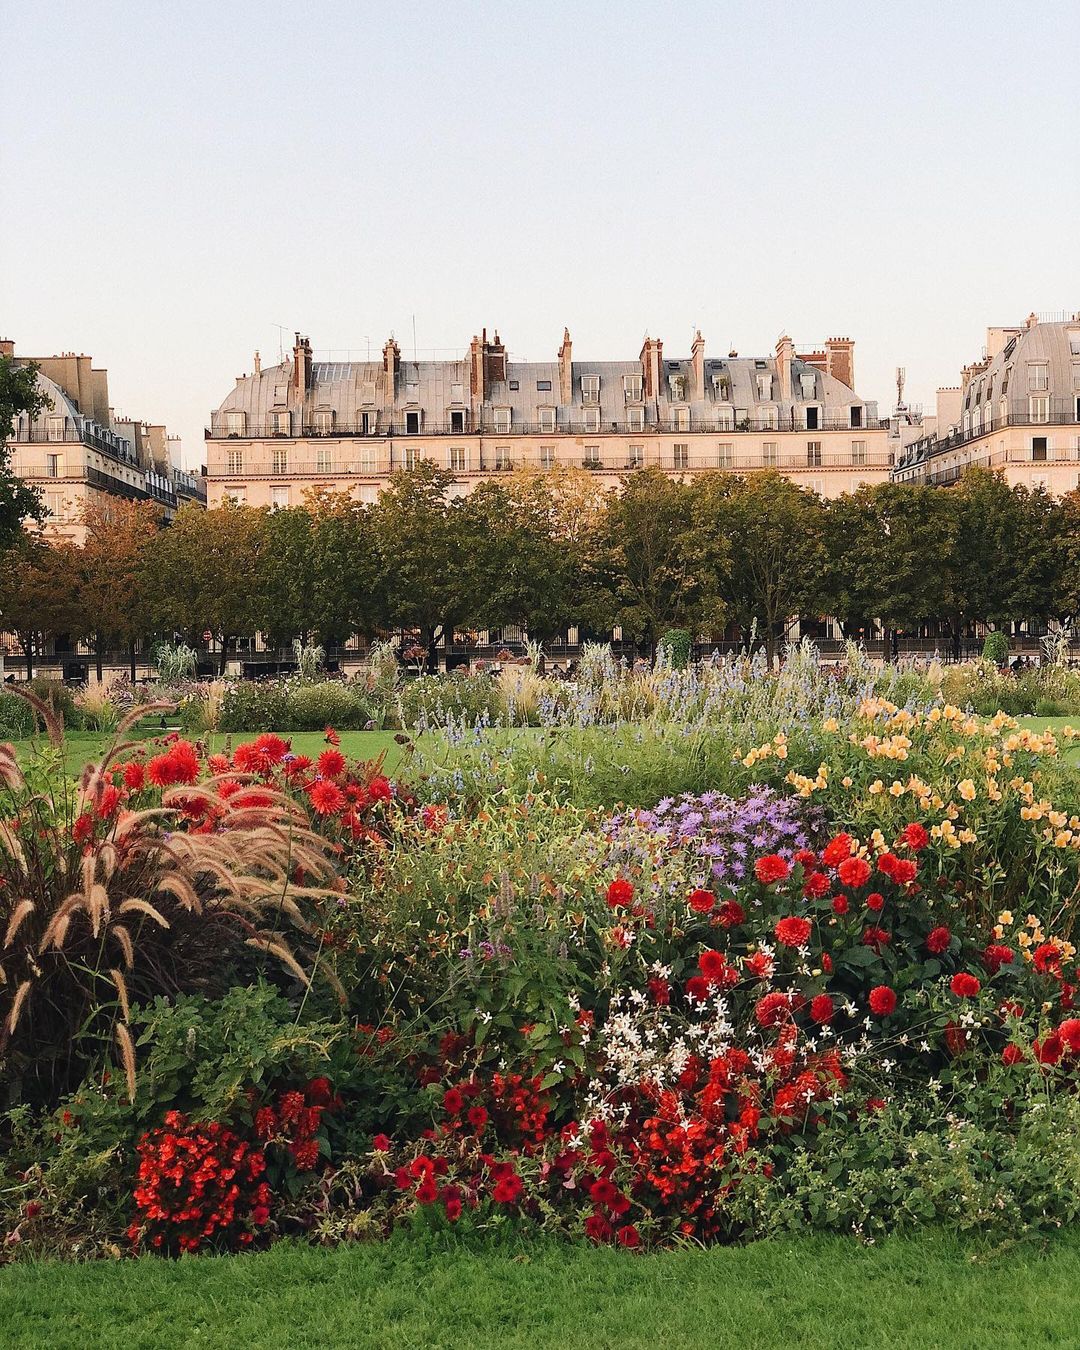 The colorful wildflowers in red, purple, yellow and blue shades at Jardin des Tuileries